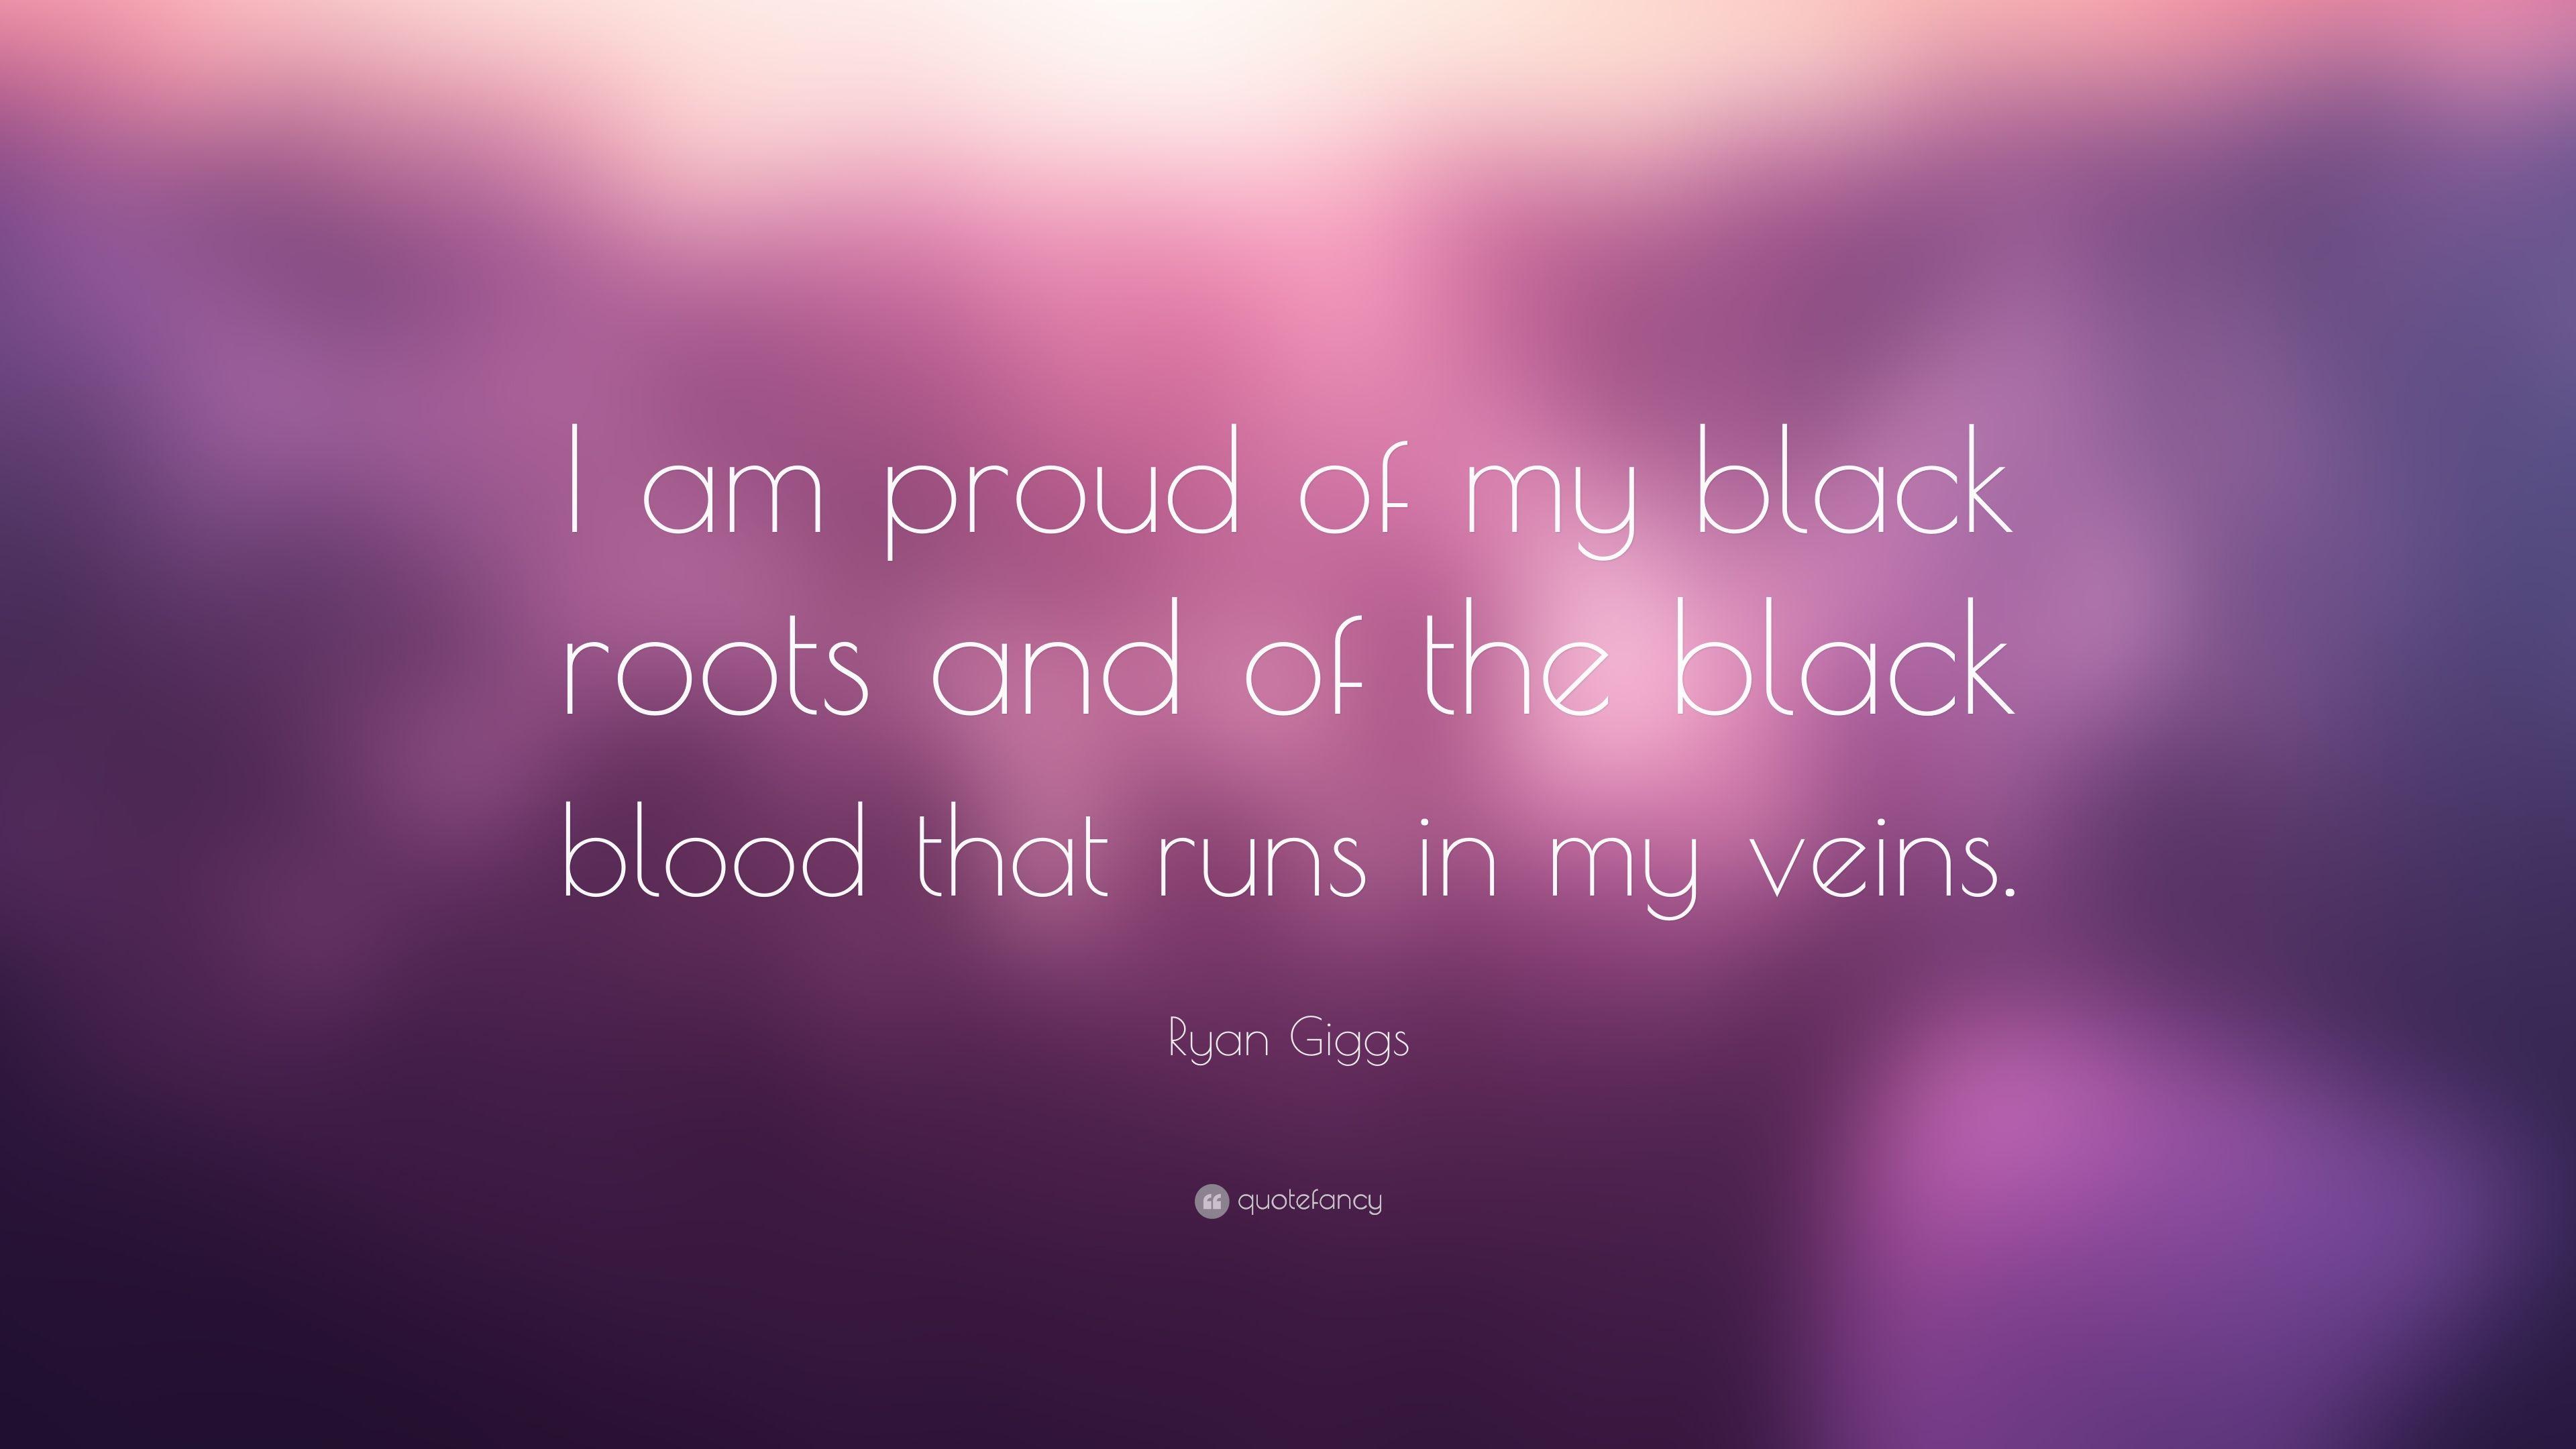 Ryan Giggs Quote: “I am proud of my black roots and of the black